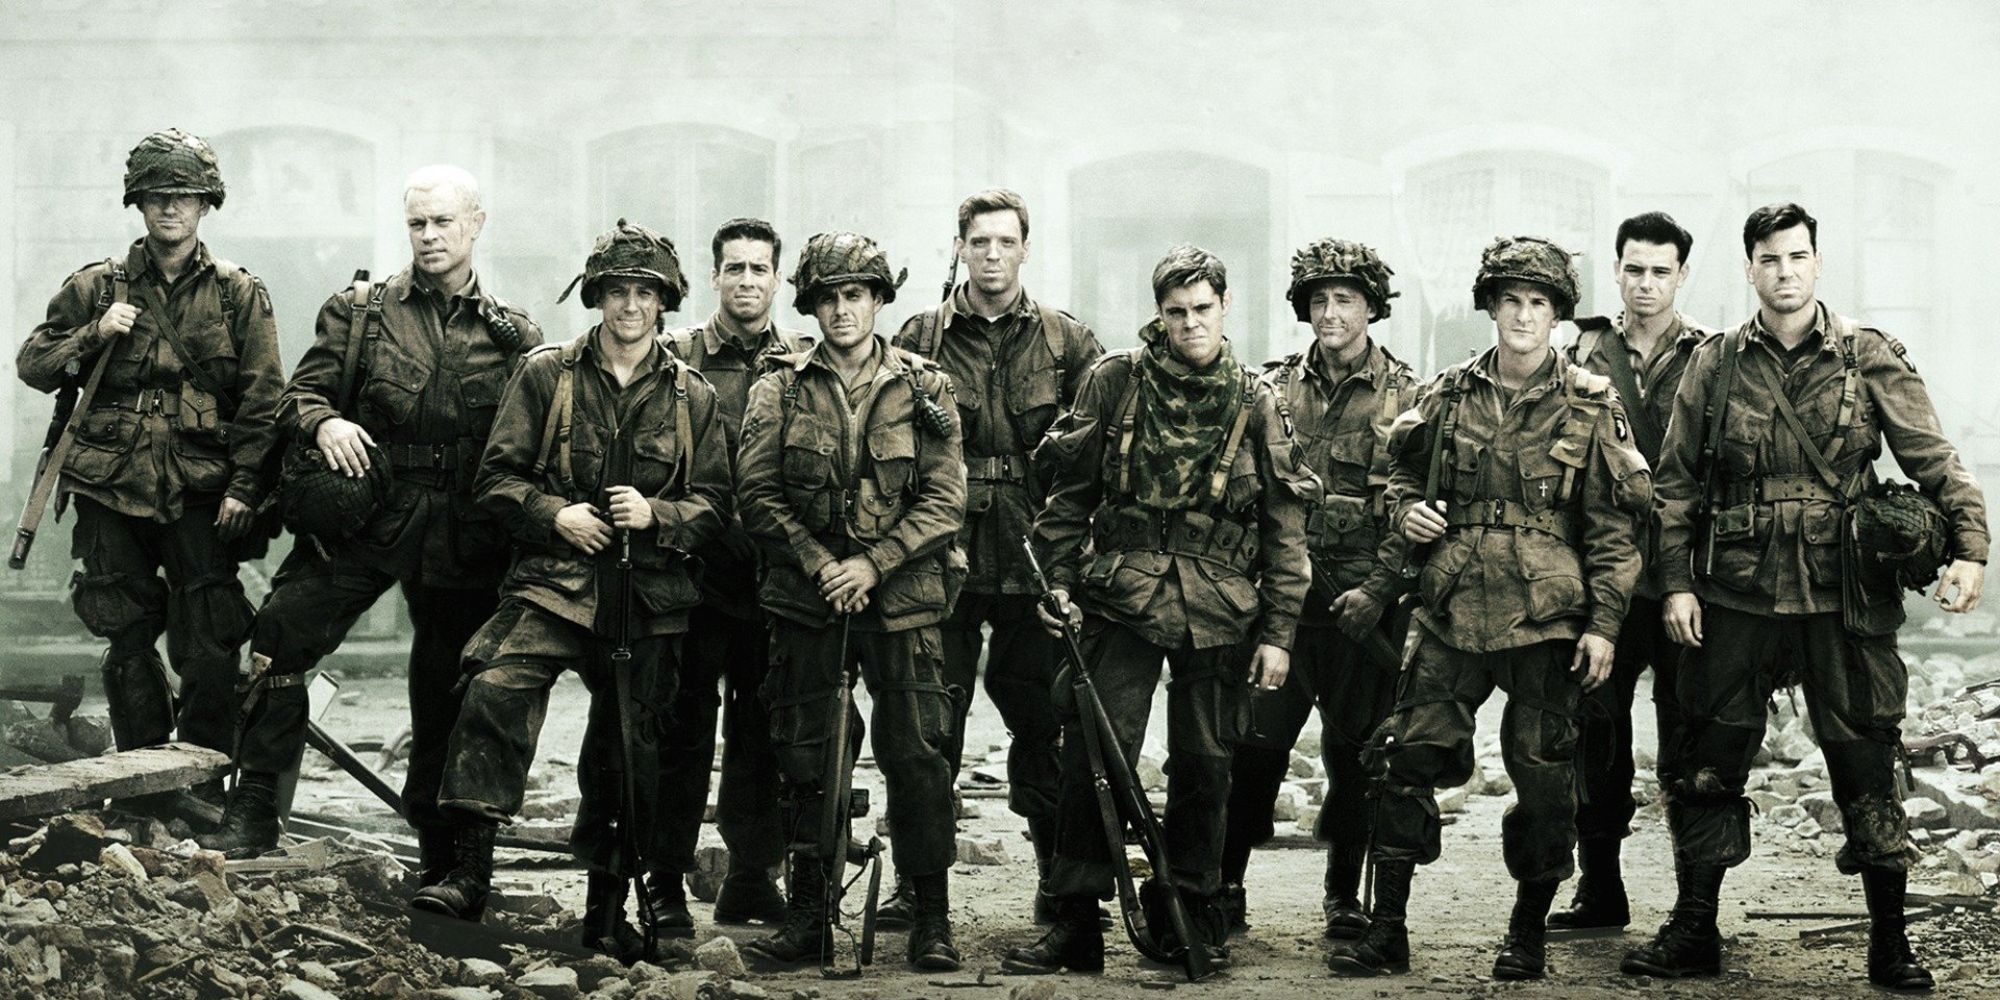 a band of soldiers posing for a picture in the HBO miniseries Band Of Brothers.